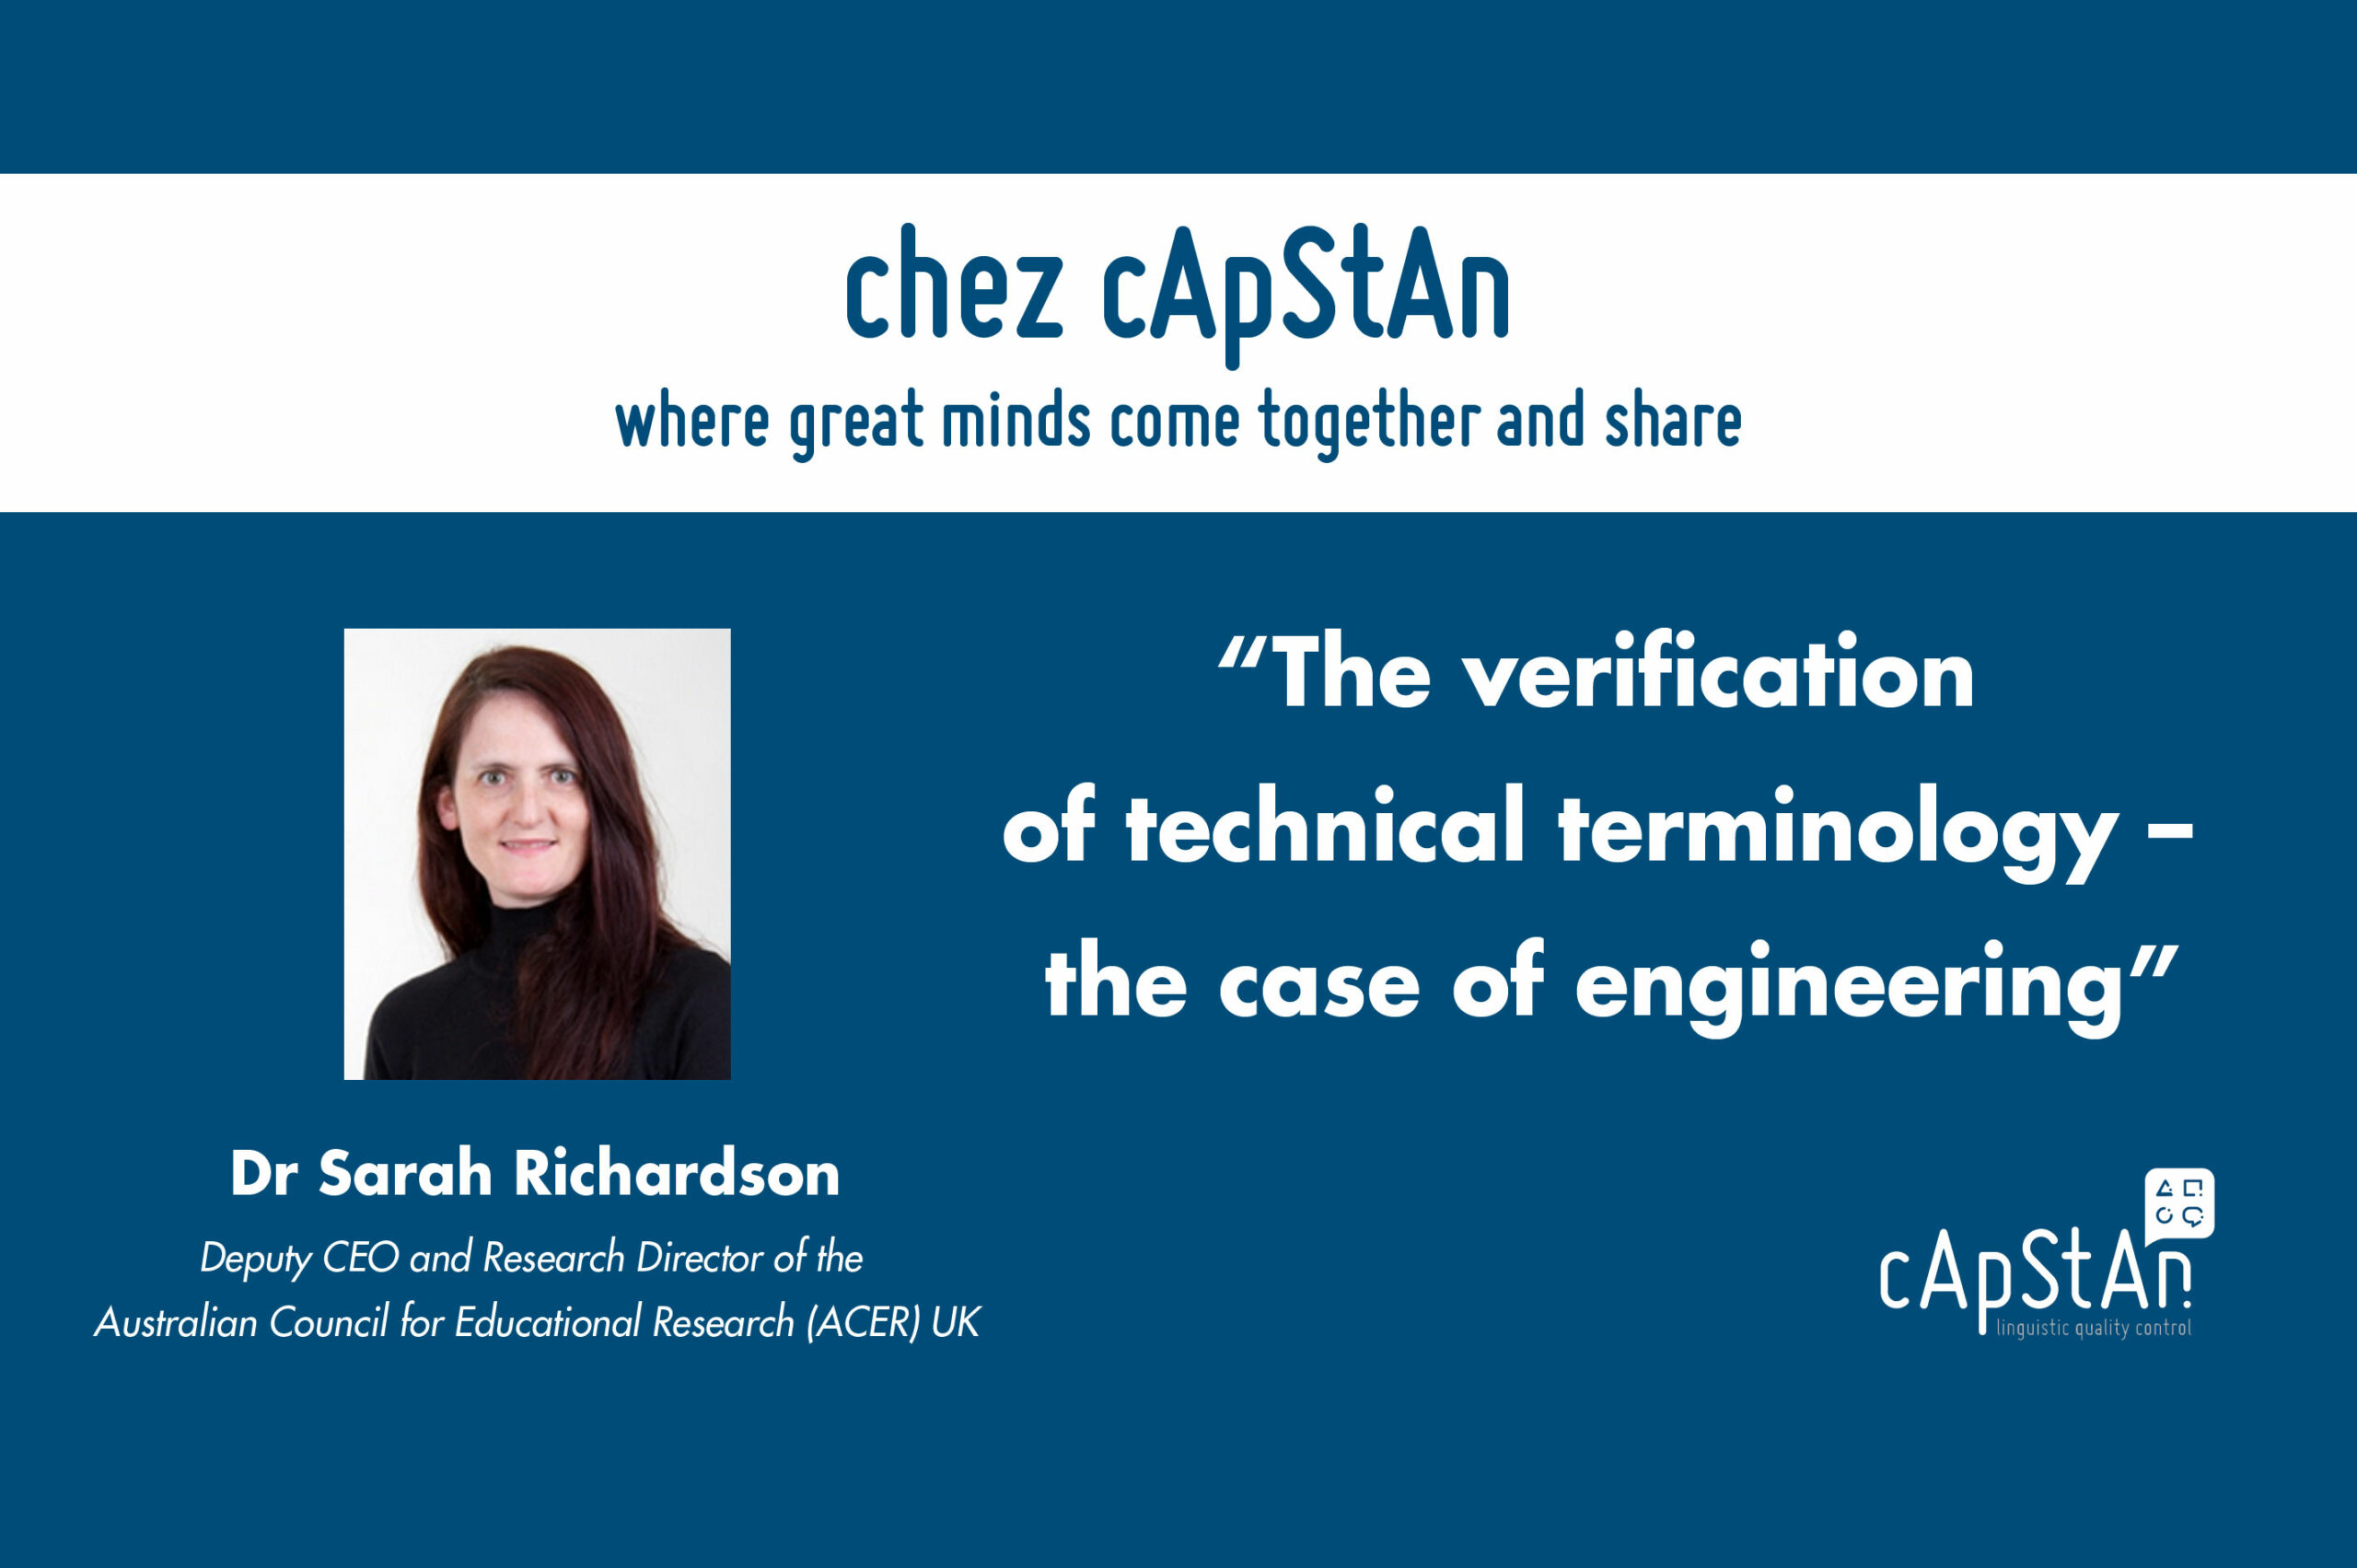 Dr. Sarah Richardson, The verification of technical terminology - the case of engineering